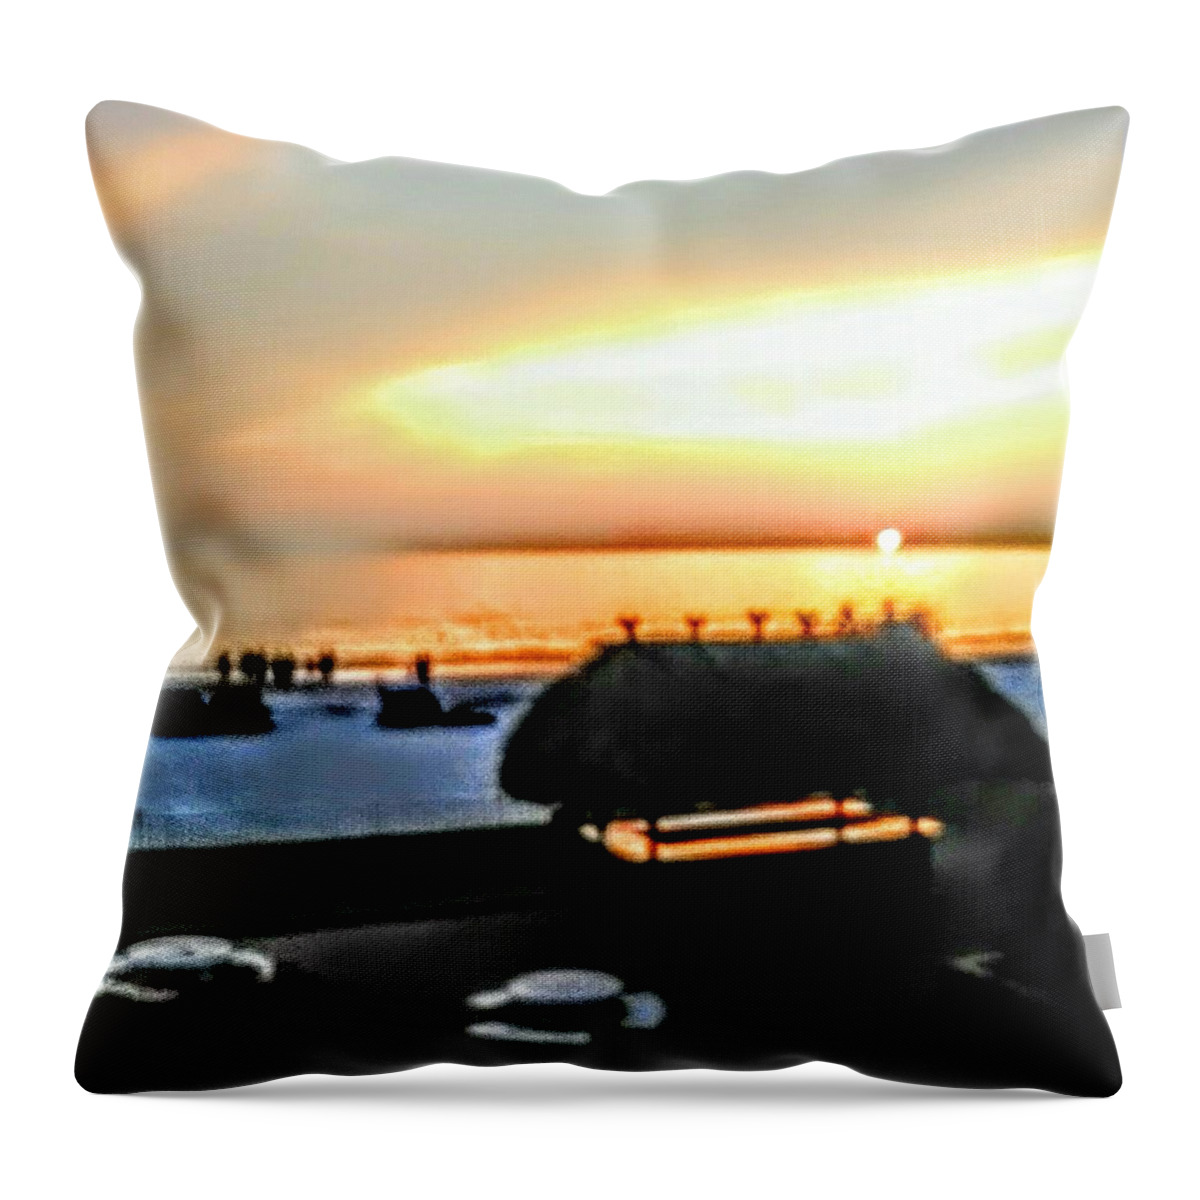 Tiki Hut Throw Pillow featuring the photograph Tiki by the Sea by Suzanne Berthier